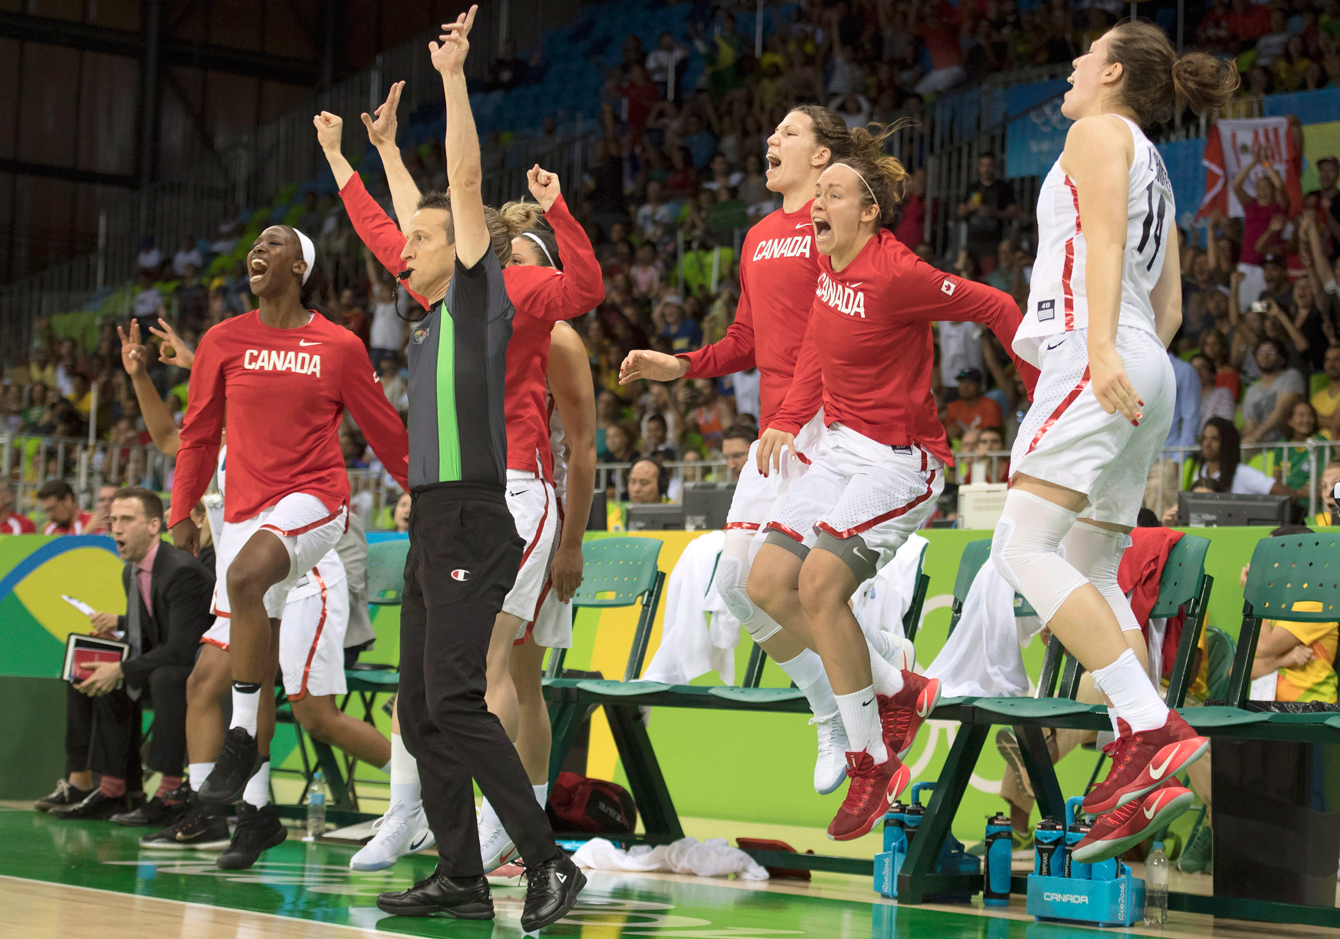 Canada's (left to right) Tamara Tatham, Michelle Plouffe, Shona Thorburn and Katherine Plouffe leap in the air as they celebrate the game-winning shot to defeat Serbia in their preliminary round basketball match at the 2016 Summer Olympics Monday August 8, 2016 in Rio de Janeiro, Brazil. THE CANADIAN PRESS/Frank Gunn